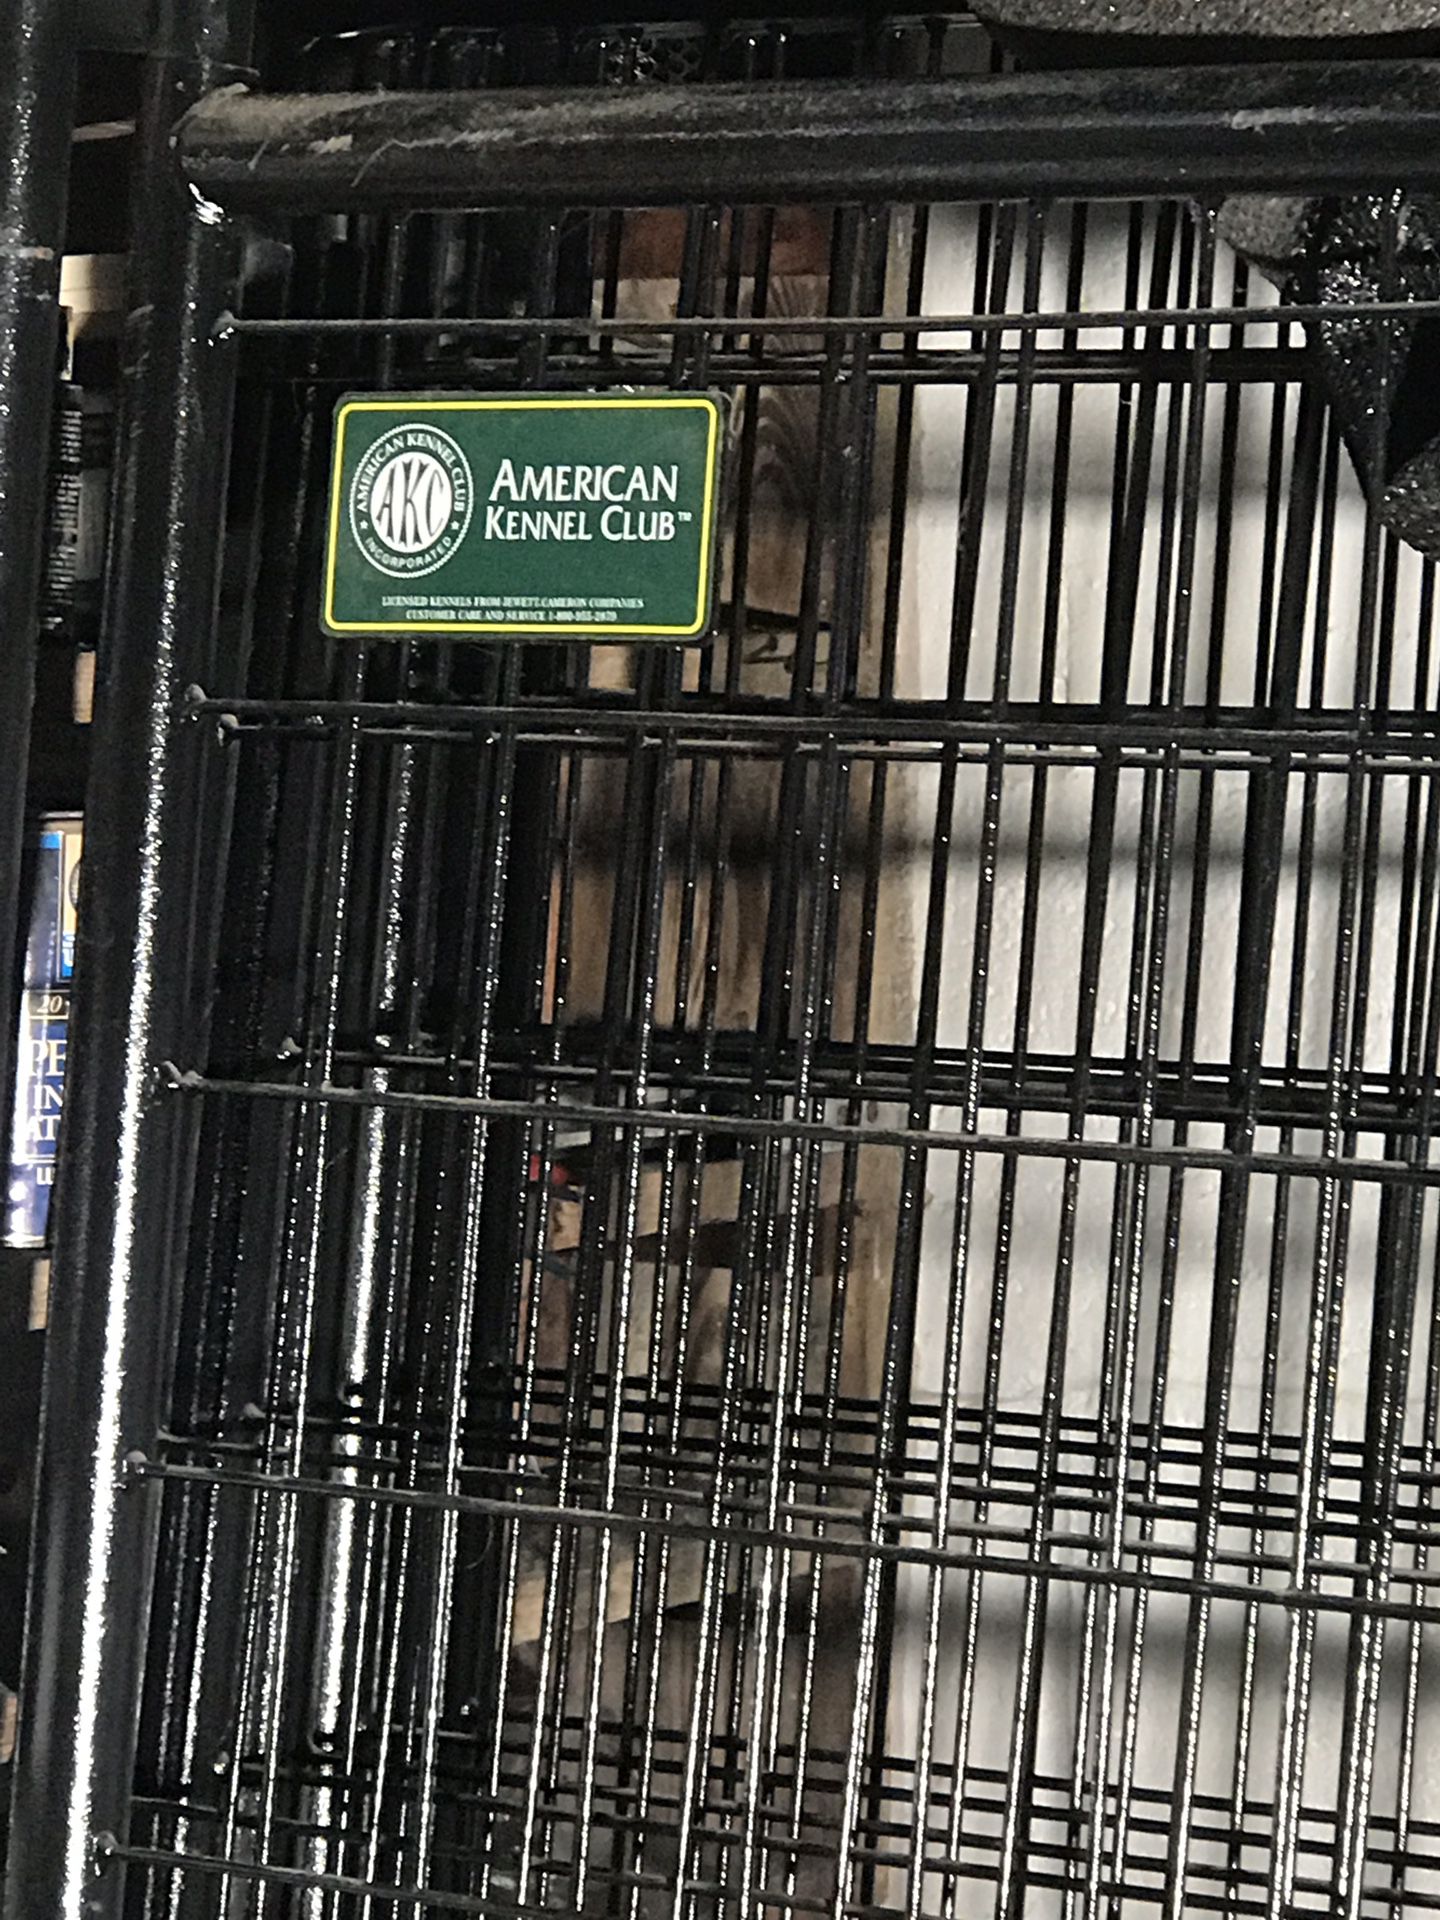 American Kennel Club 10’ by 6’ by 5’ Dog Cage